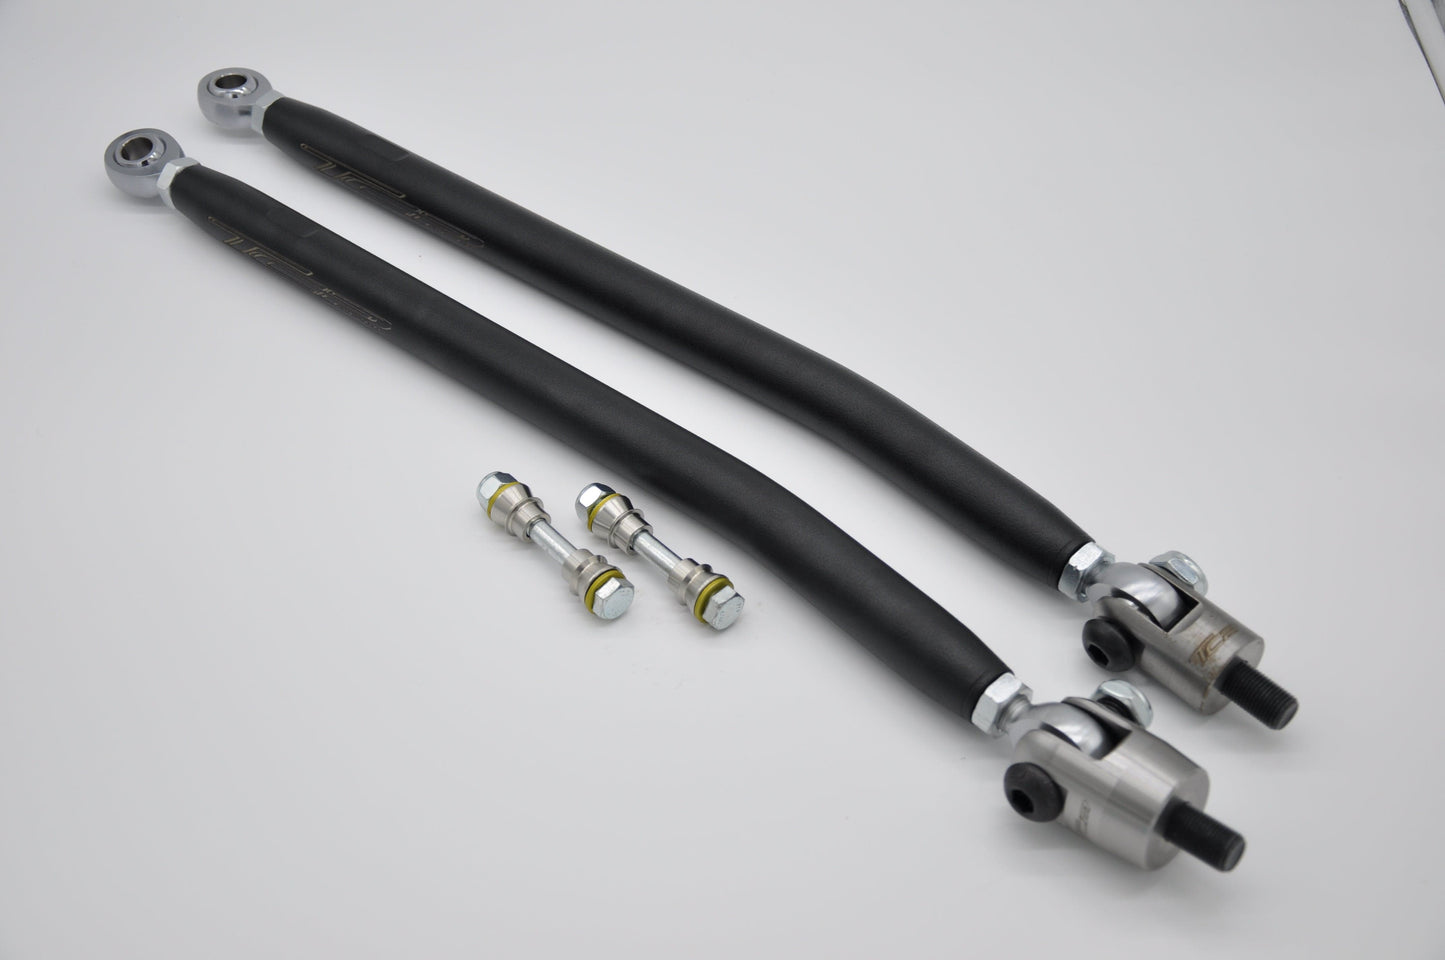 Heavy Duty Tie Rods and King Pins for the 2014 Polaris RZR 1000 with SATV +10 Lift, Top View